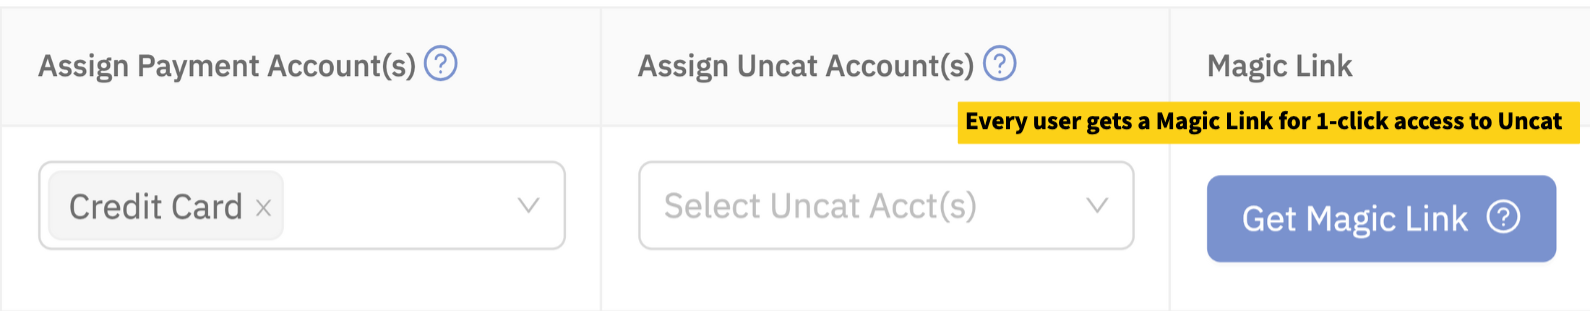 Every user gets a Magic Link for 1-click access to Uncat.